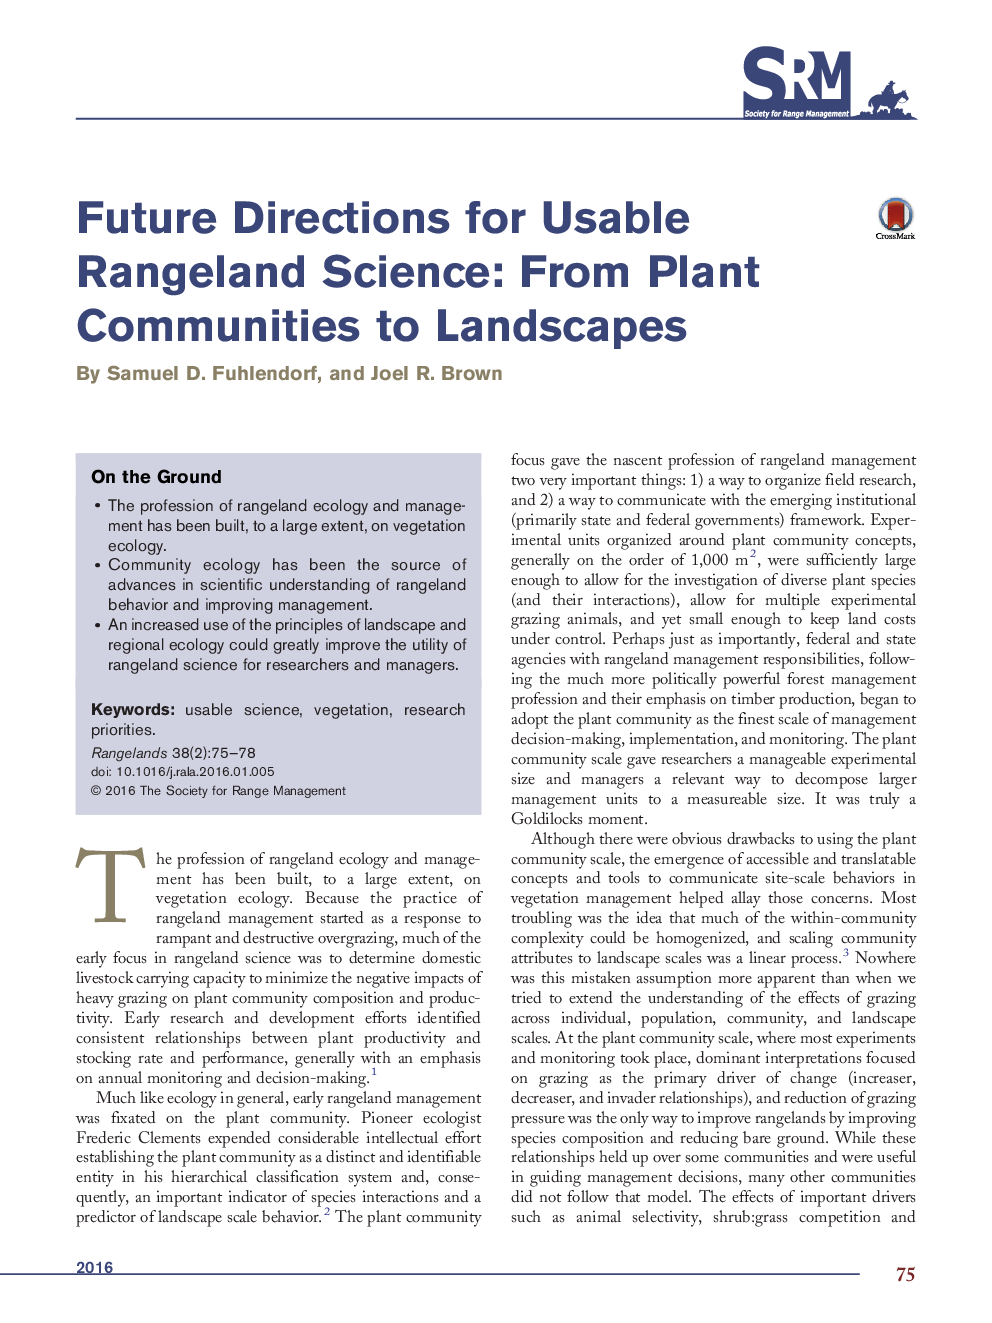 Future Directions for Usable Rangeland Science: From Plant Communities to Landscapes